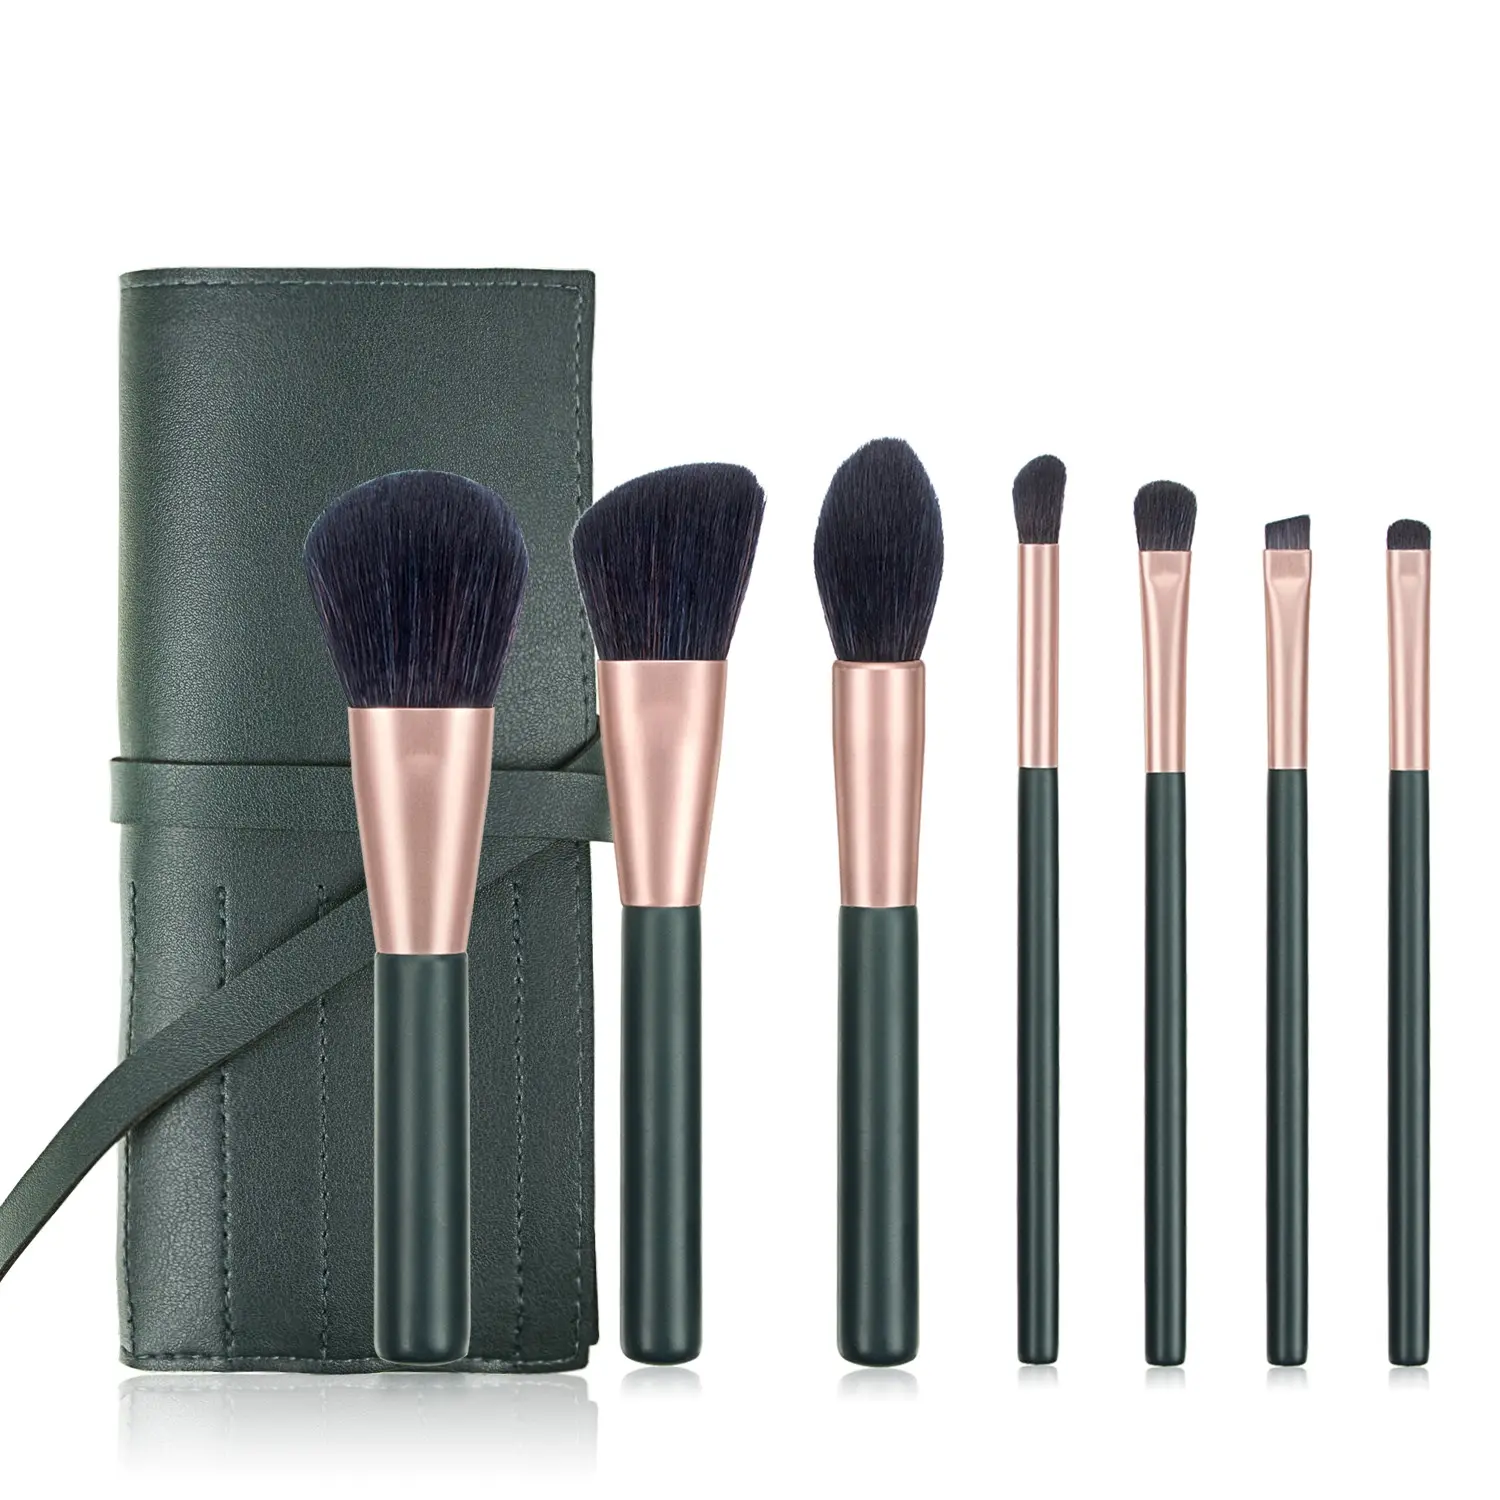 BUEYA 7pcs HOT sale green color professional brand makeup set brushes manufacture cleaner and dryer include packaging